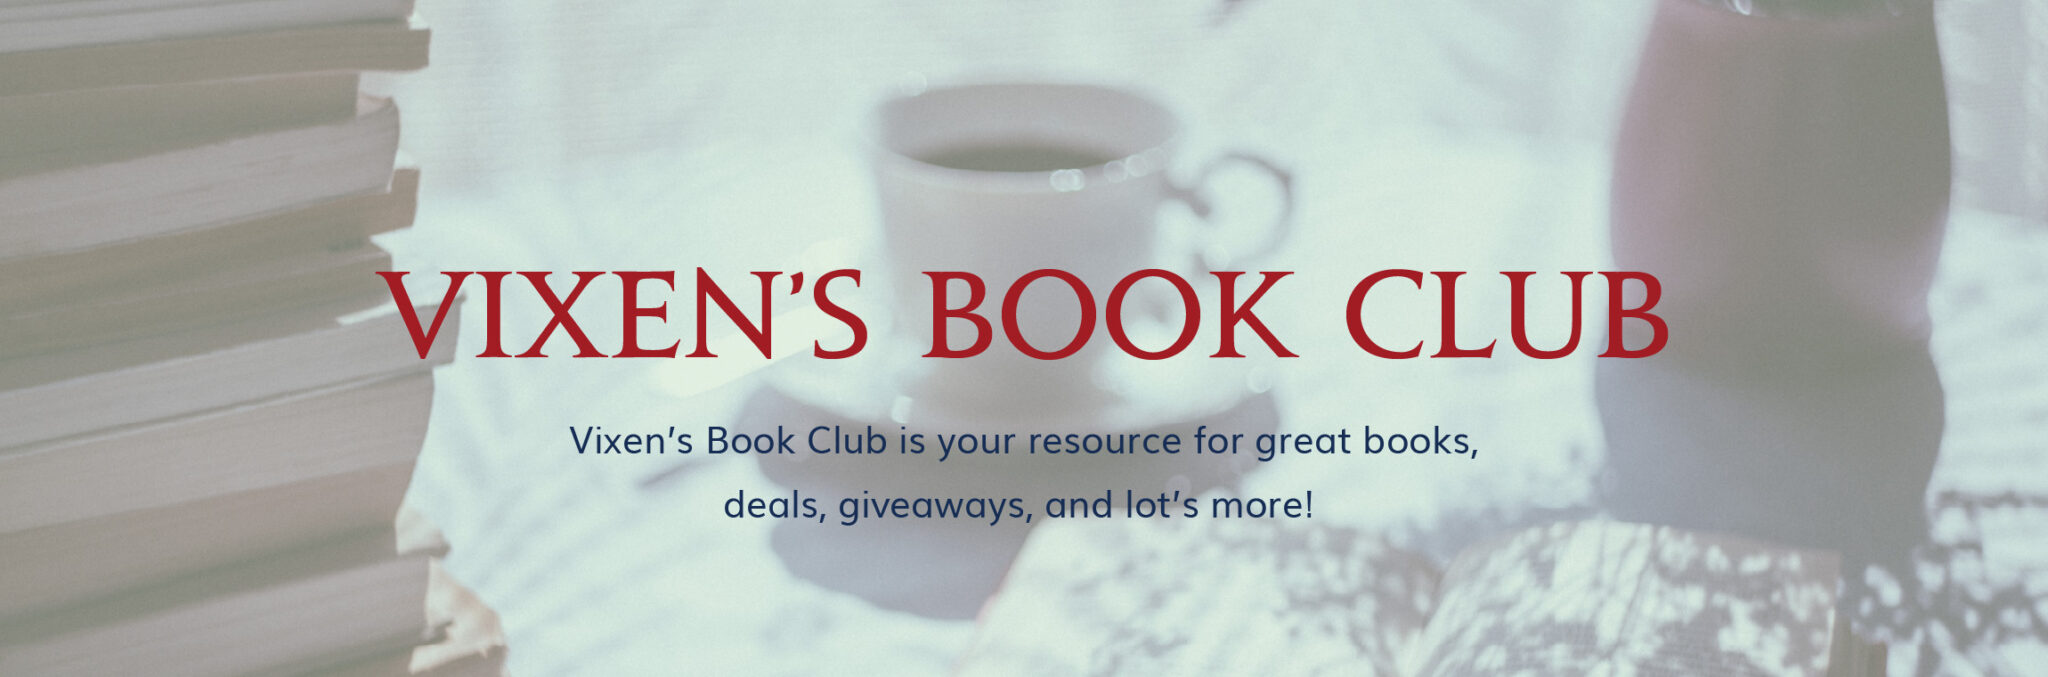 Vixen's Book Club is your resource for great books, deals, giveaways, and lot's more!